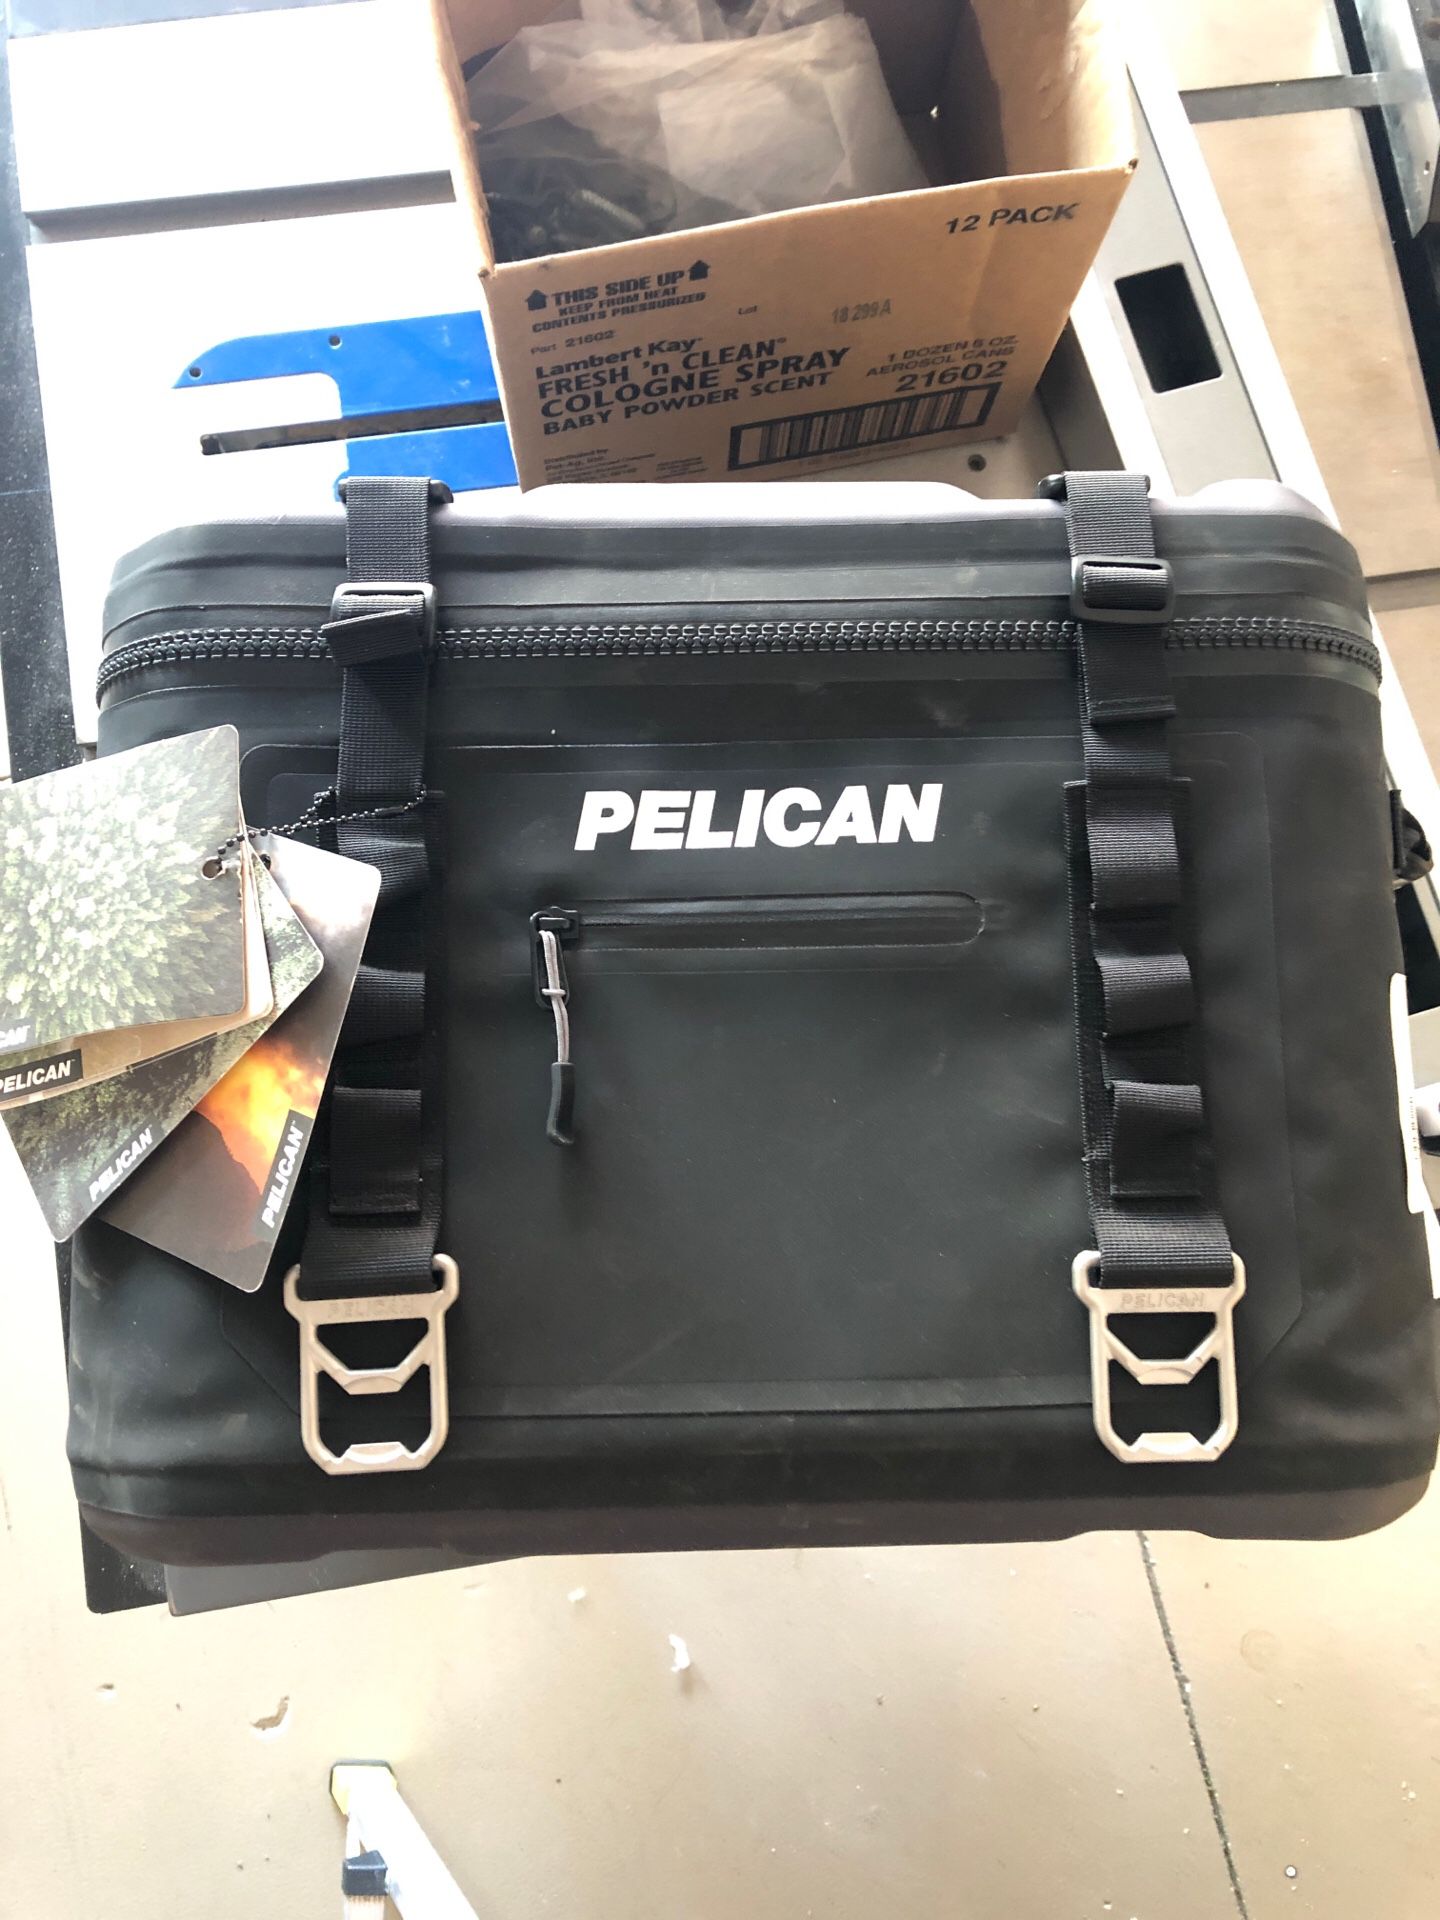 Pelican cooler. New never used.